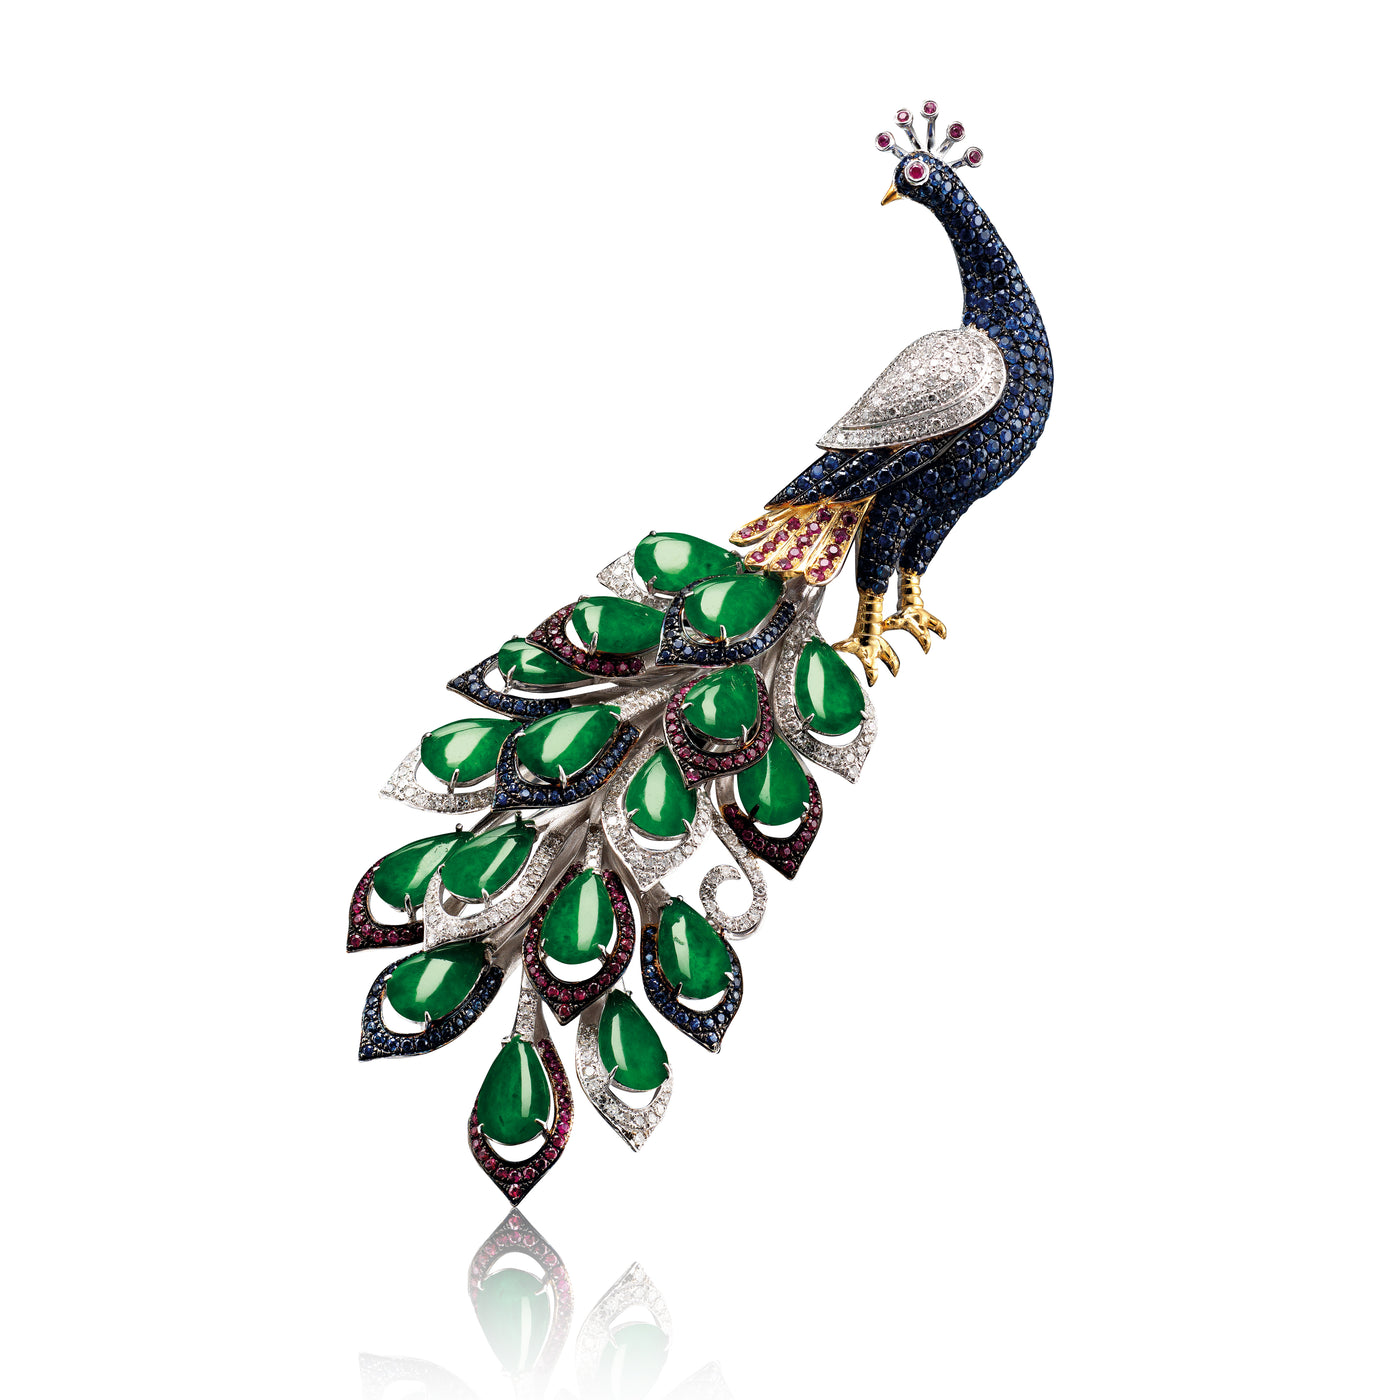 Peacock Jadeite Brooch in 18K white gold with diamond and sapphire